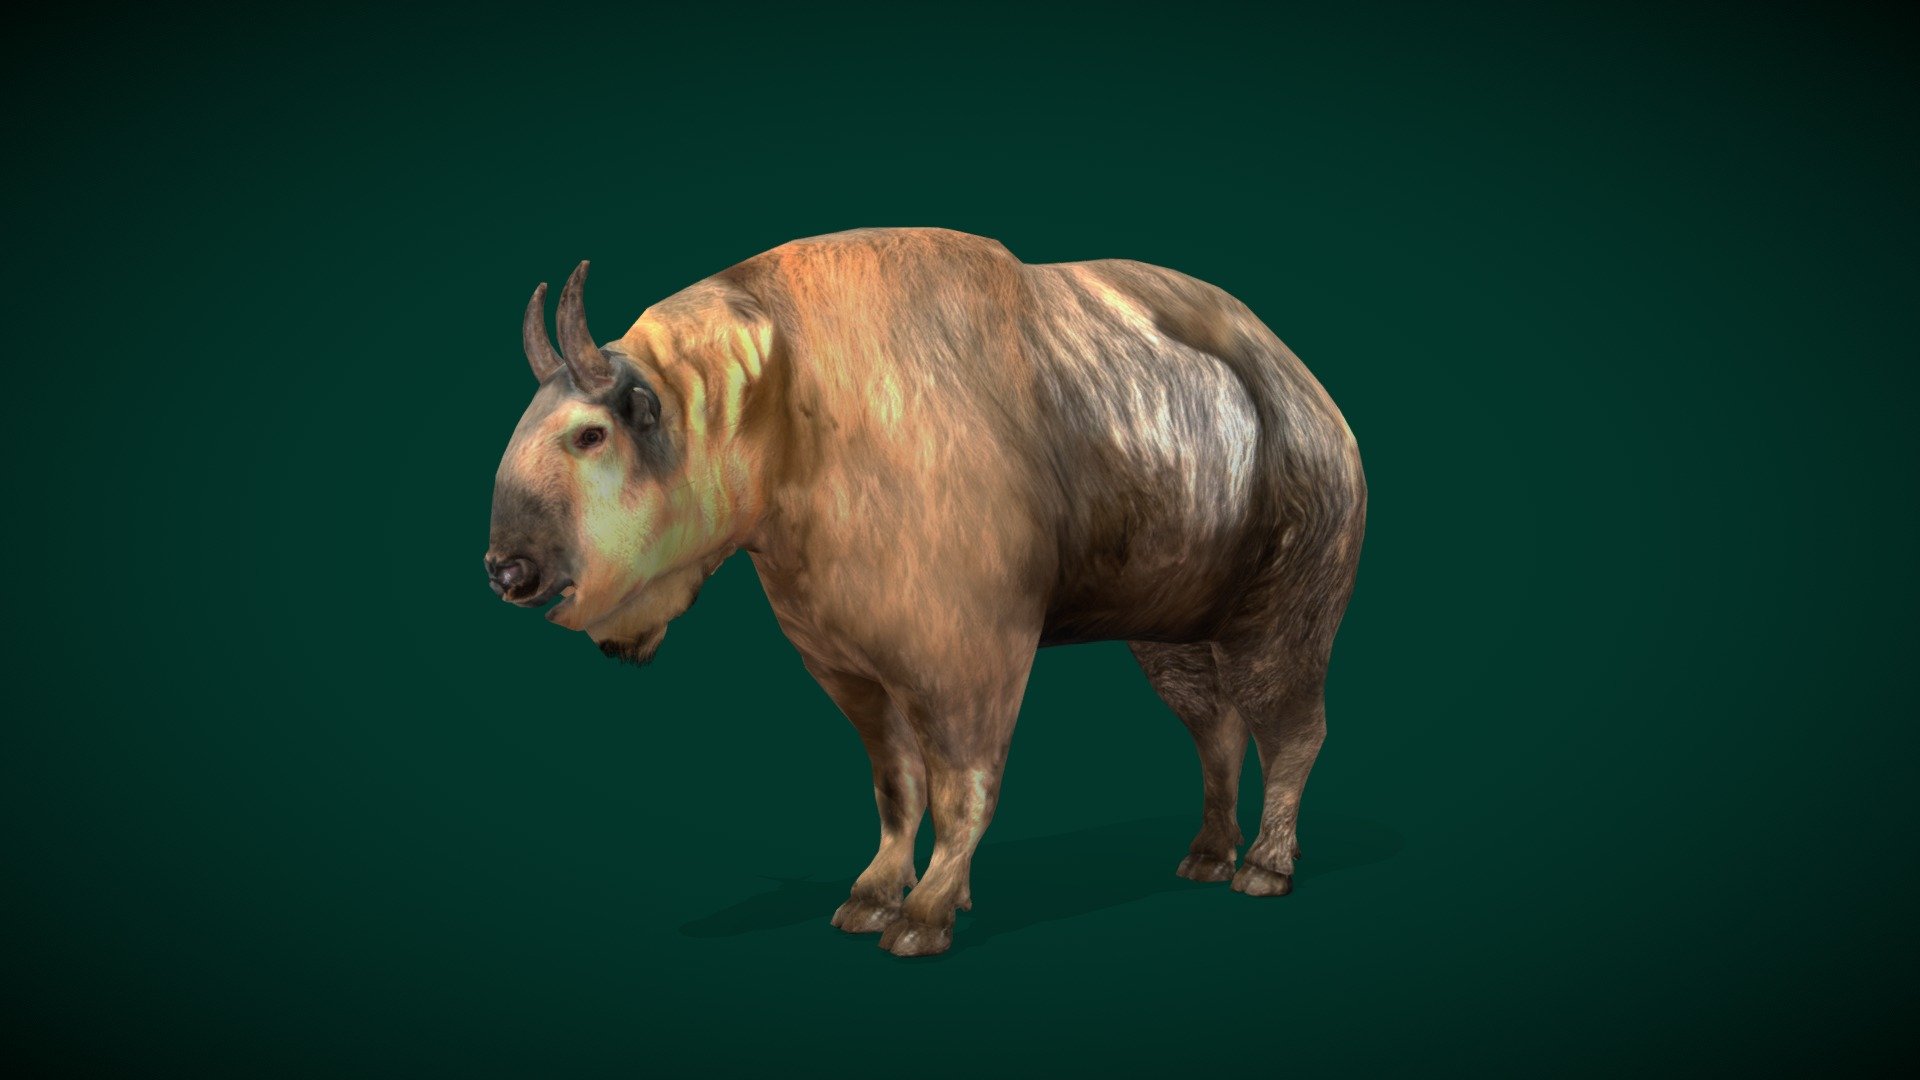 American Male Golden Takin (cattle chamois or gnu goat )Engandered

Budorcas taxicolor bedfordi Animal Mammal Animalia (Tierpark Berlin)Bovidae

1 Draw Calls

Lowpoly 

Game Ready Asset

Subdivision Surface Ready

8- Animations

4K PBR Textures Material

Unreal FBX (Unreal 4,5 Plus)

Unity FBX

Blend File 3.6.5 LTS

USDZ File (AR Ready). Real Scale Dimension (Xcode ,Reality Composer, Keynote Ready)

Textures Files

GLB File (Unreal 5.1 Plus Native Support)


Gltf File ( Spark AR, Lens Studio(SnapChat) , Effector(Tiktok) , Spline, Play Canvas,Omiverse ) Compatible




Triangles -6575   



Faces -3392

Edges -6693

Vertices -3300

Diffuse, Metallic, Roughness , Normal Map ,Specular Map,AO
A male golden takin (Budorcas taxicolor bedfordi) at Tierpark_Berlin in Germany. This species is listed as vulnerable by IUCN.
The takin, also called cattle chamois or gnu goat, is a large species of ungulate of the subfamily Caprinae found in the eastern Himalayas 3d model